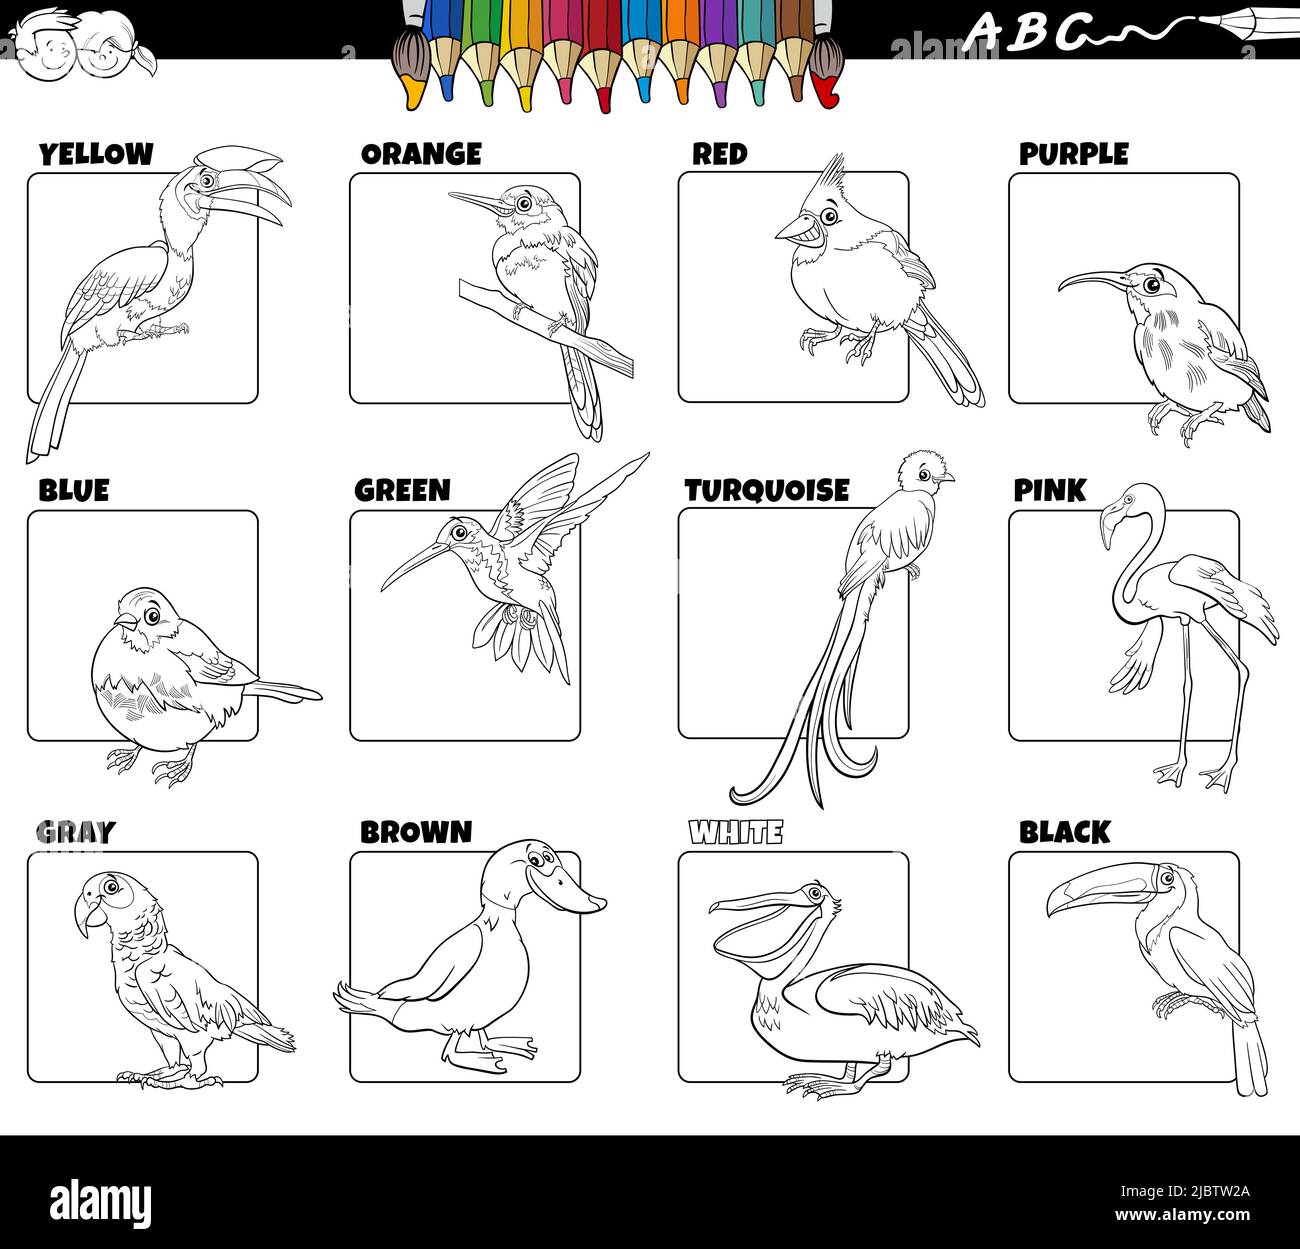 Black and white cartoon illustration of basic colors with comic birds animal characters educational set coloring page Stock Vector